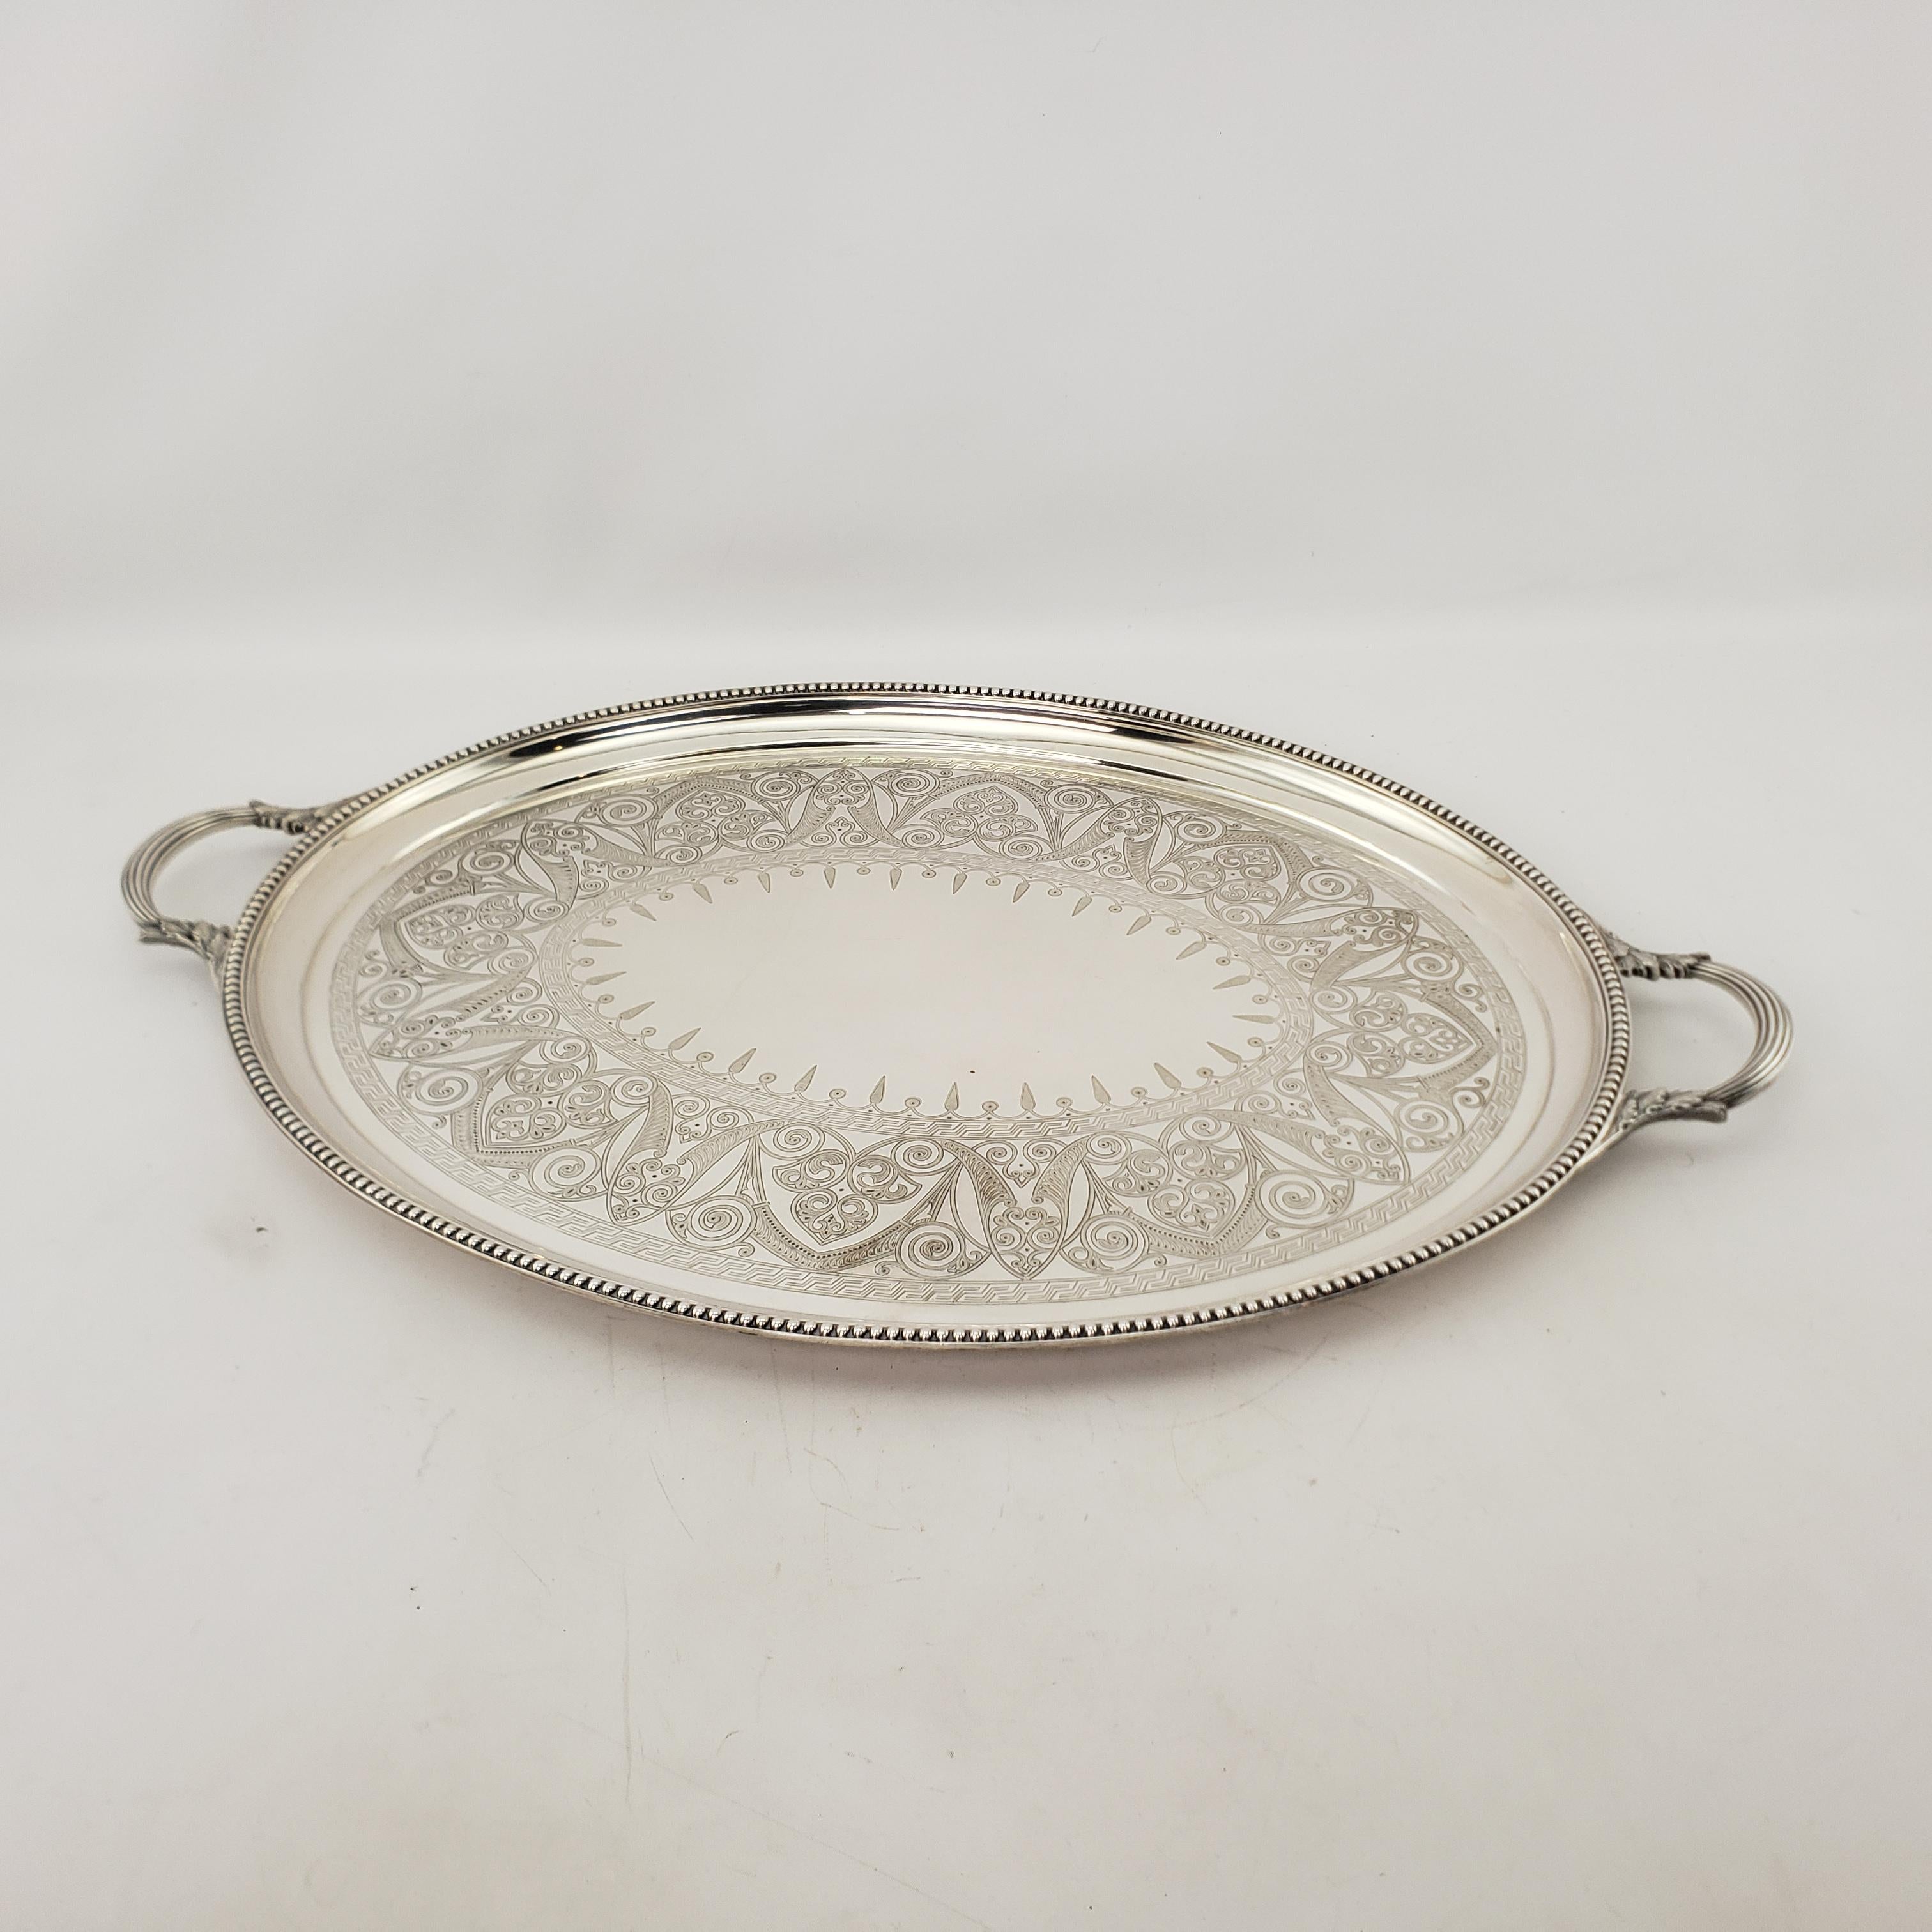 This large antique oval serving tray was made by the well known Elkington Co. of England in approximately 1920 in an Edwardian style. The tray is composed of silver plate over copper and has a beaded edge with ornate stylized floral engraved